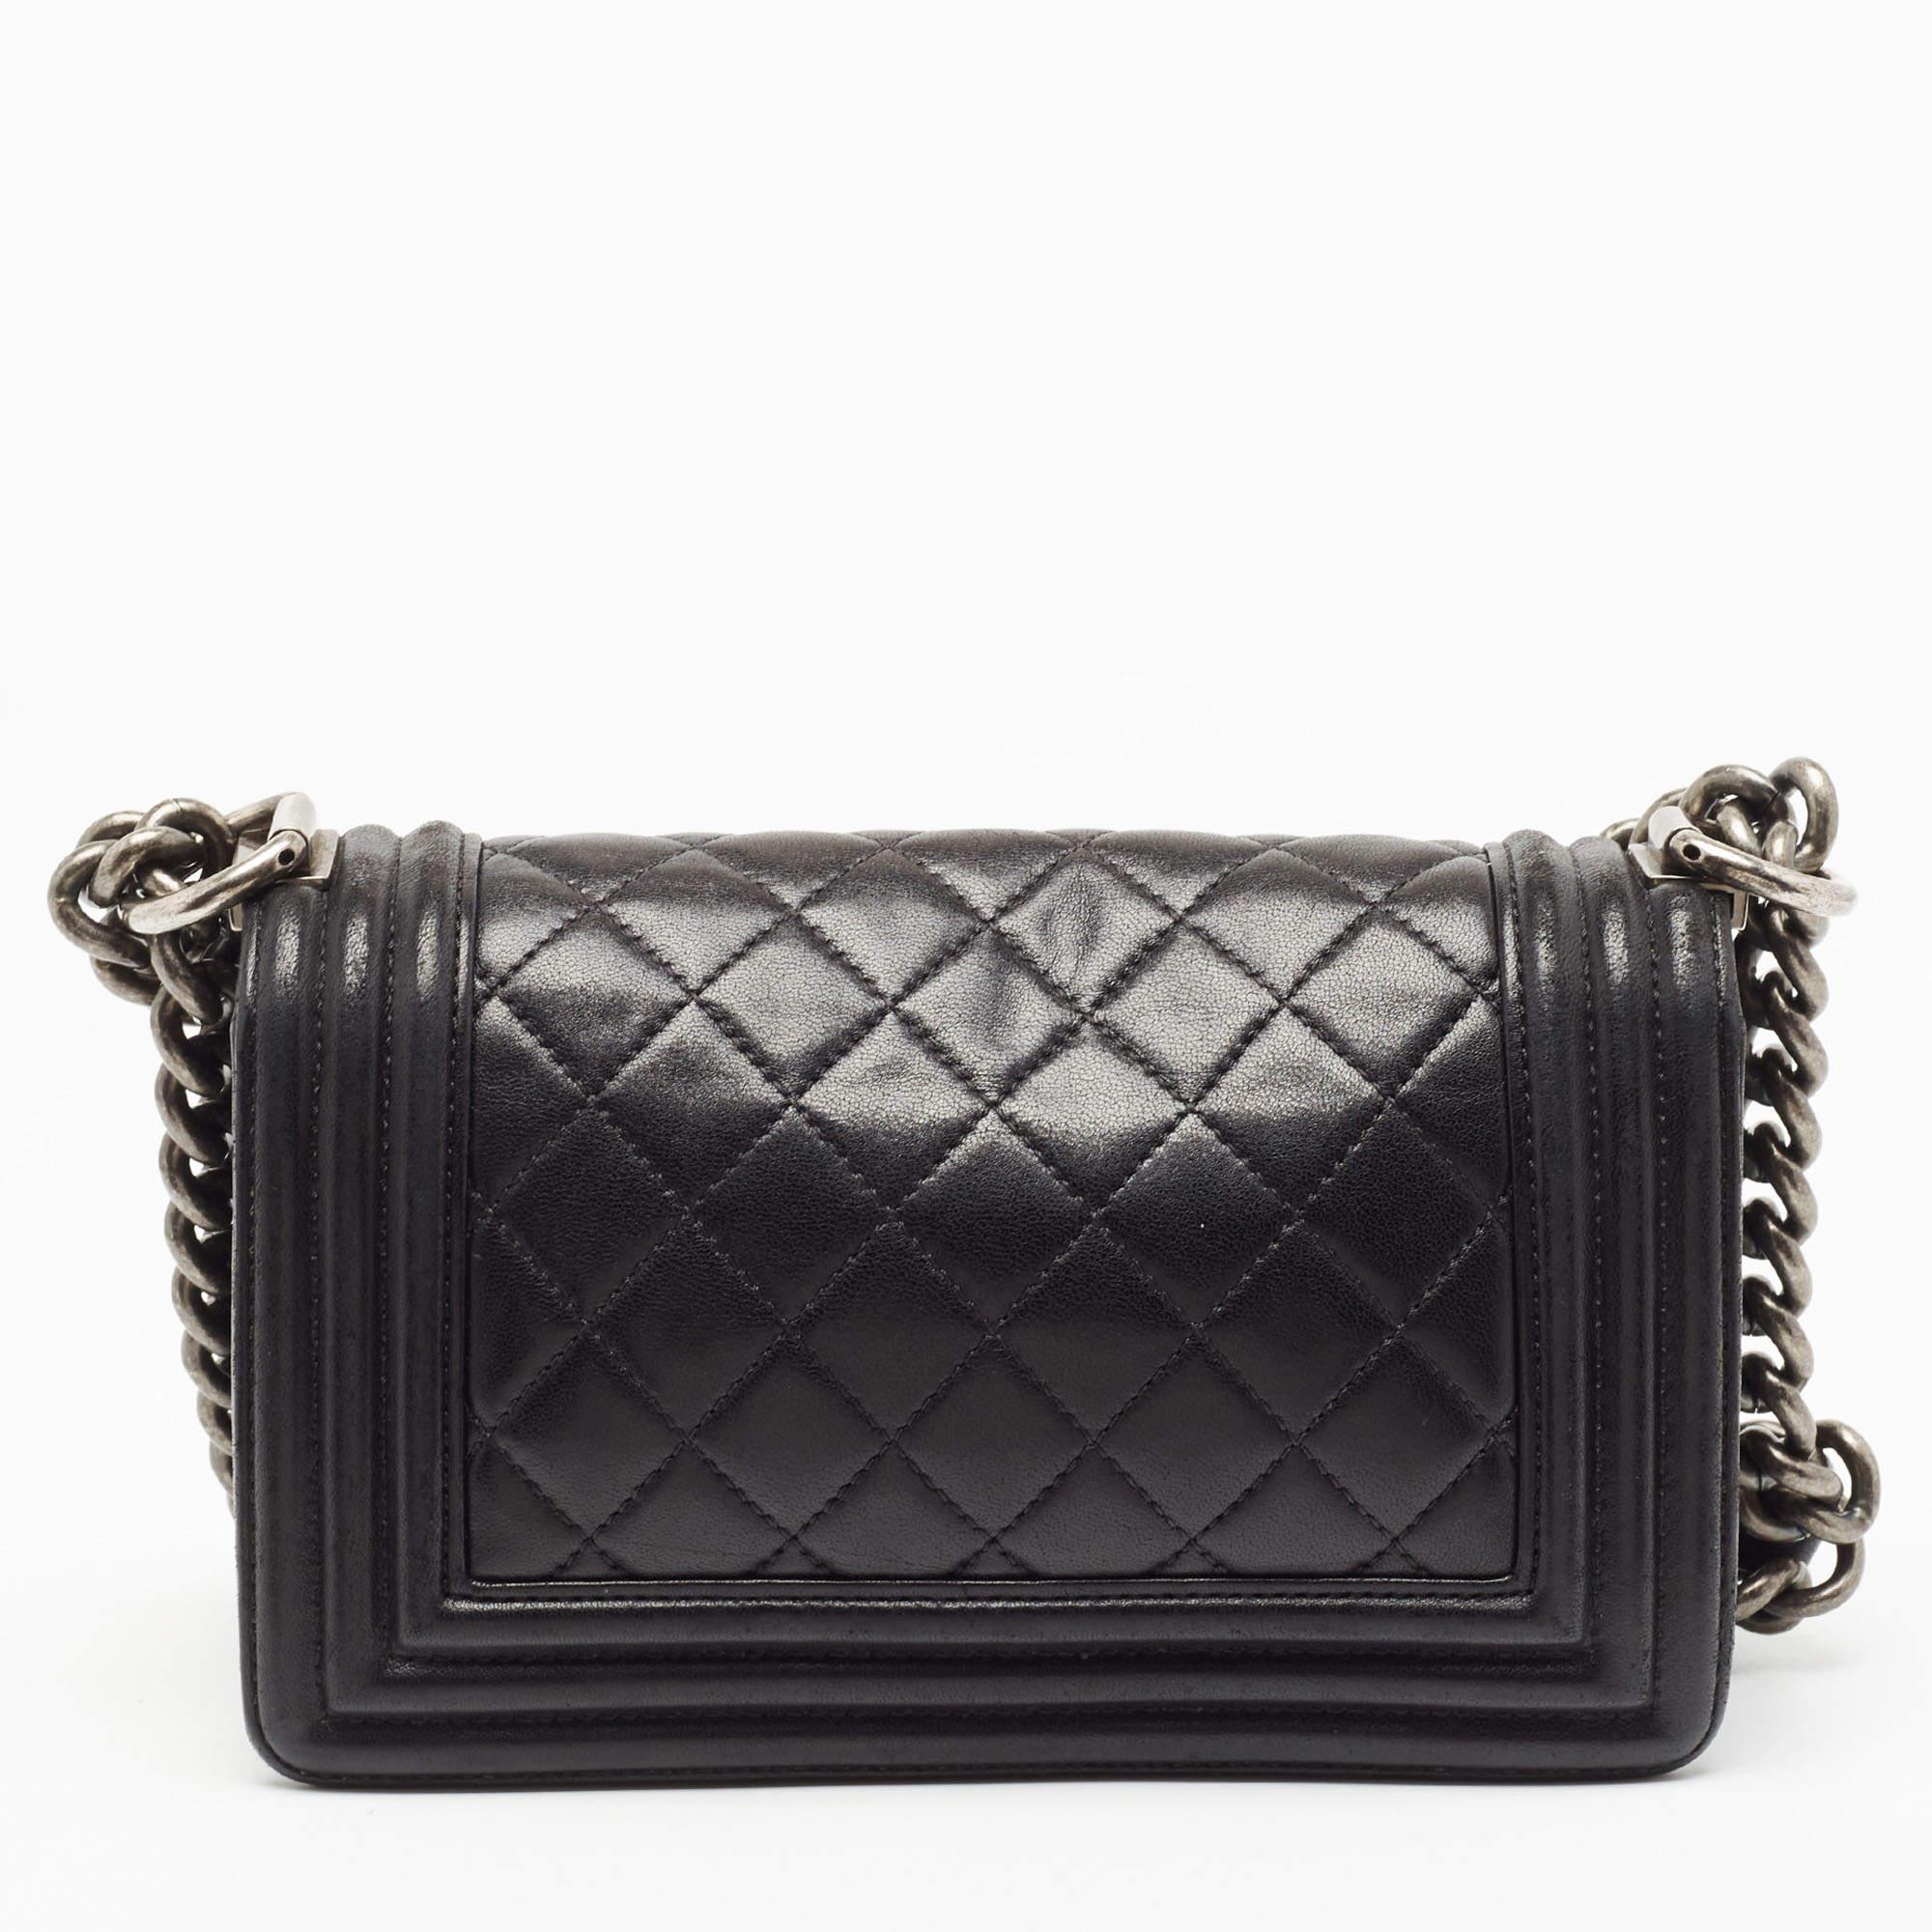 Women's Chanel Black Quilted Leather Small Boy Bag